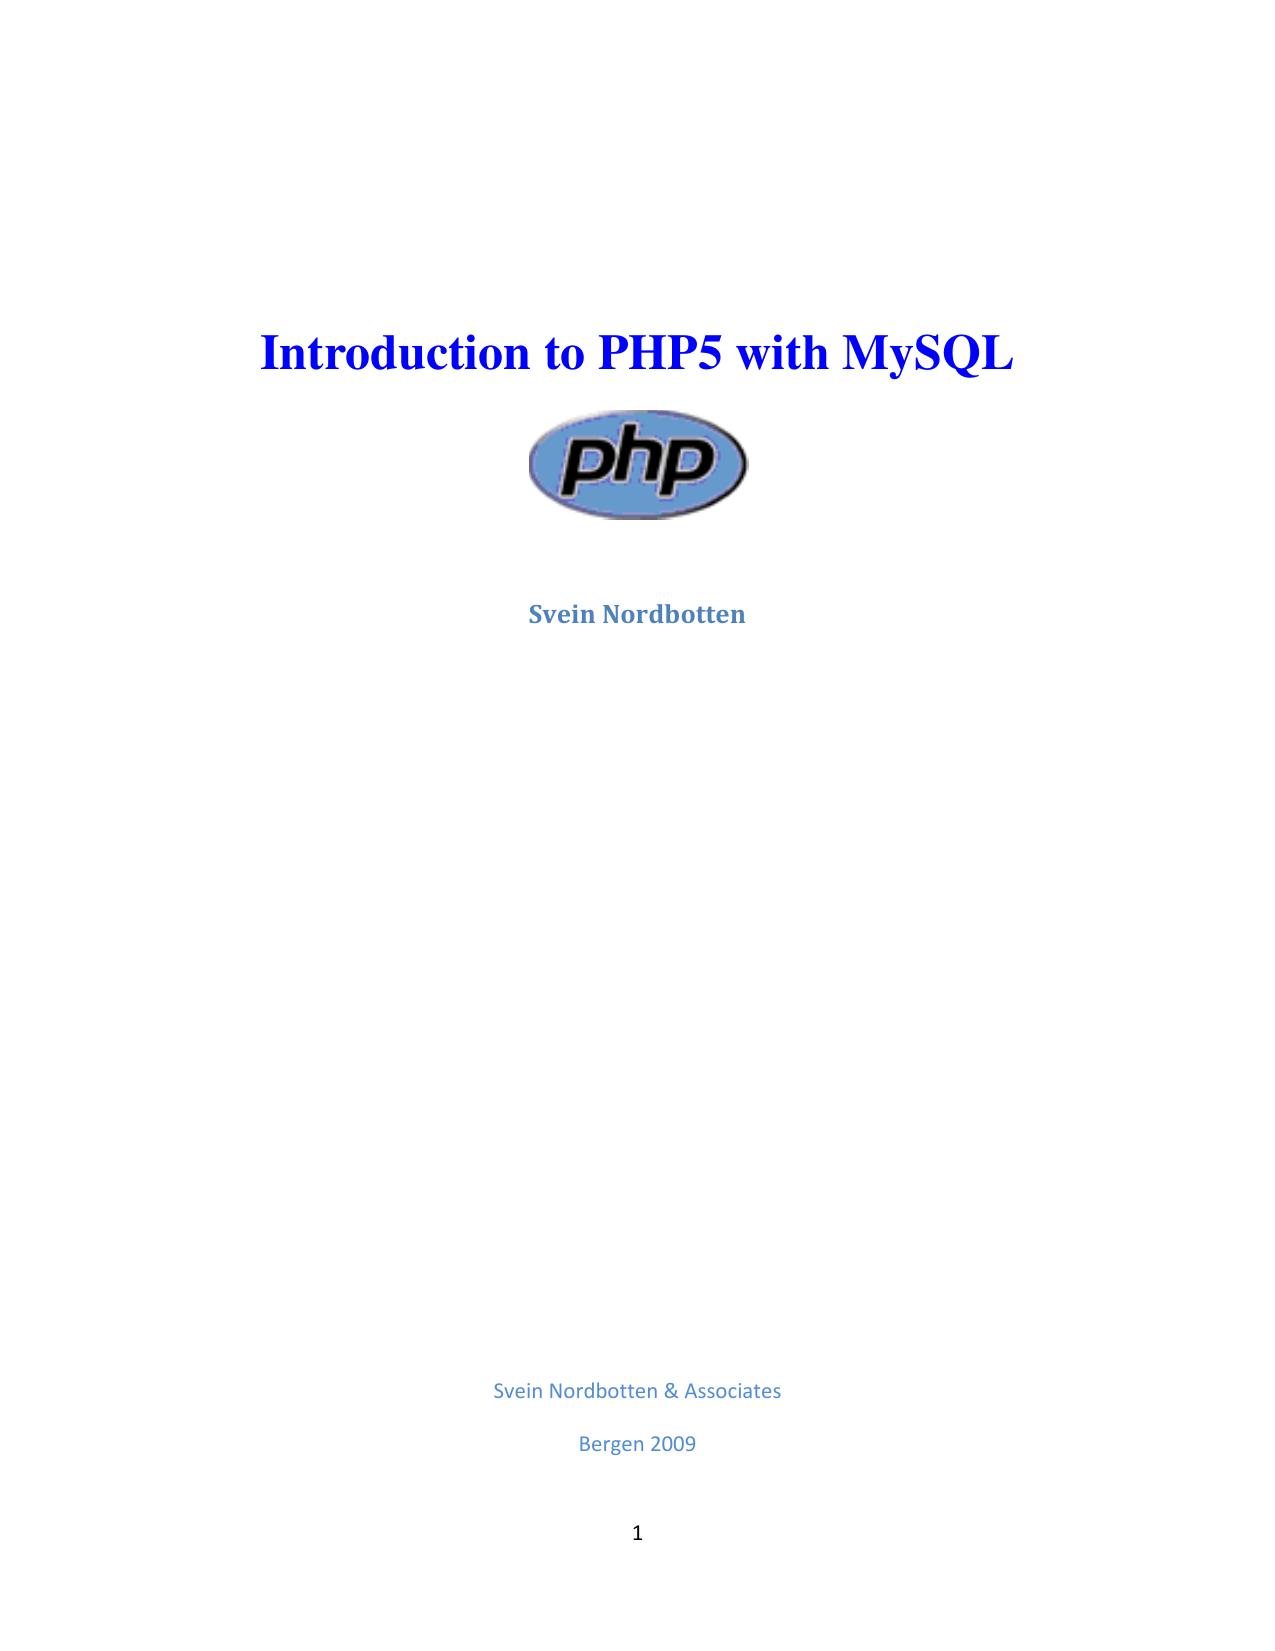 Introduction to PHP5 with MySQL 2009